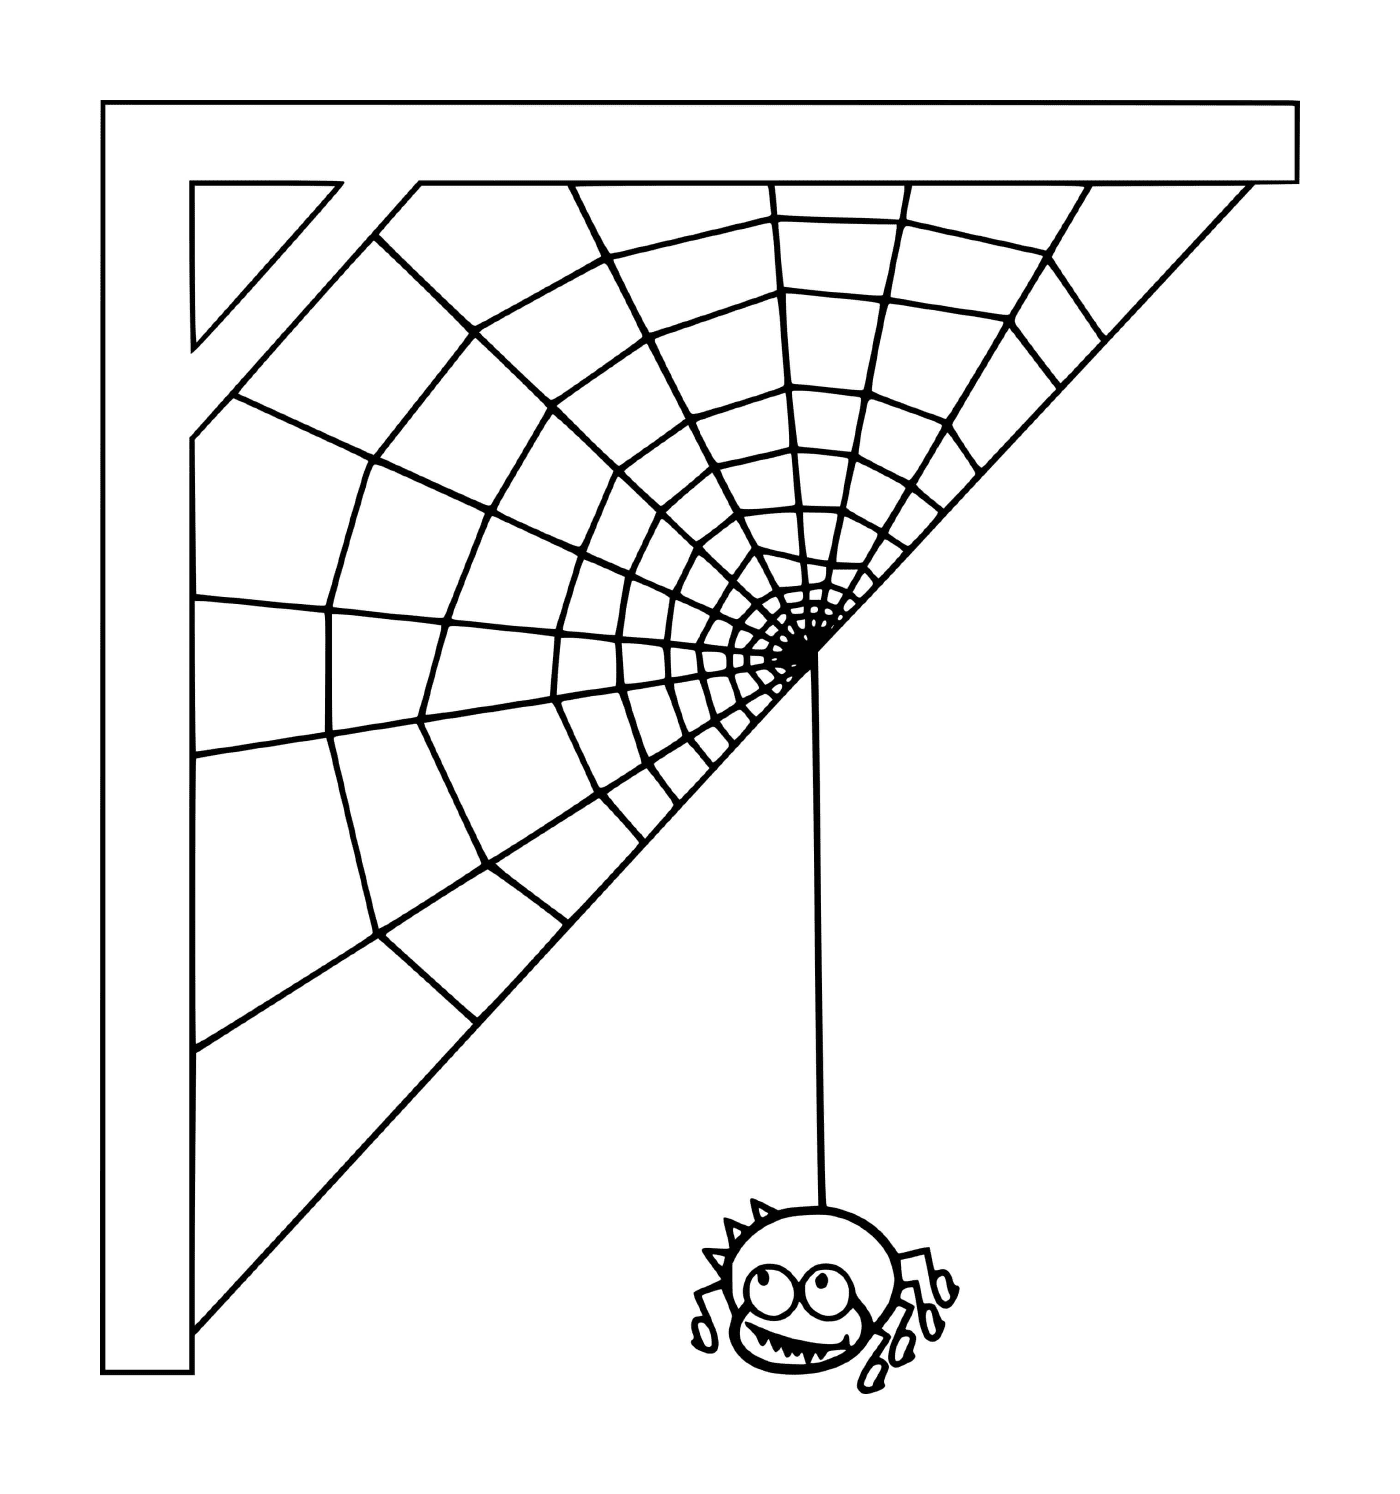  A spider web woven by a spider 